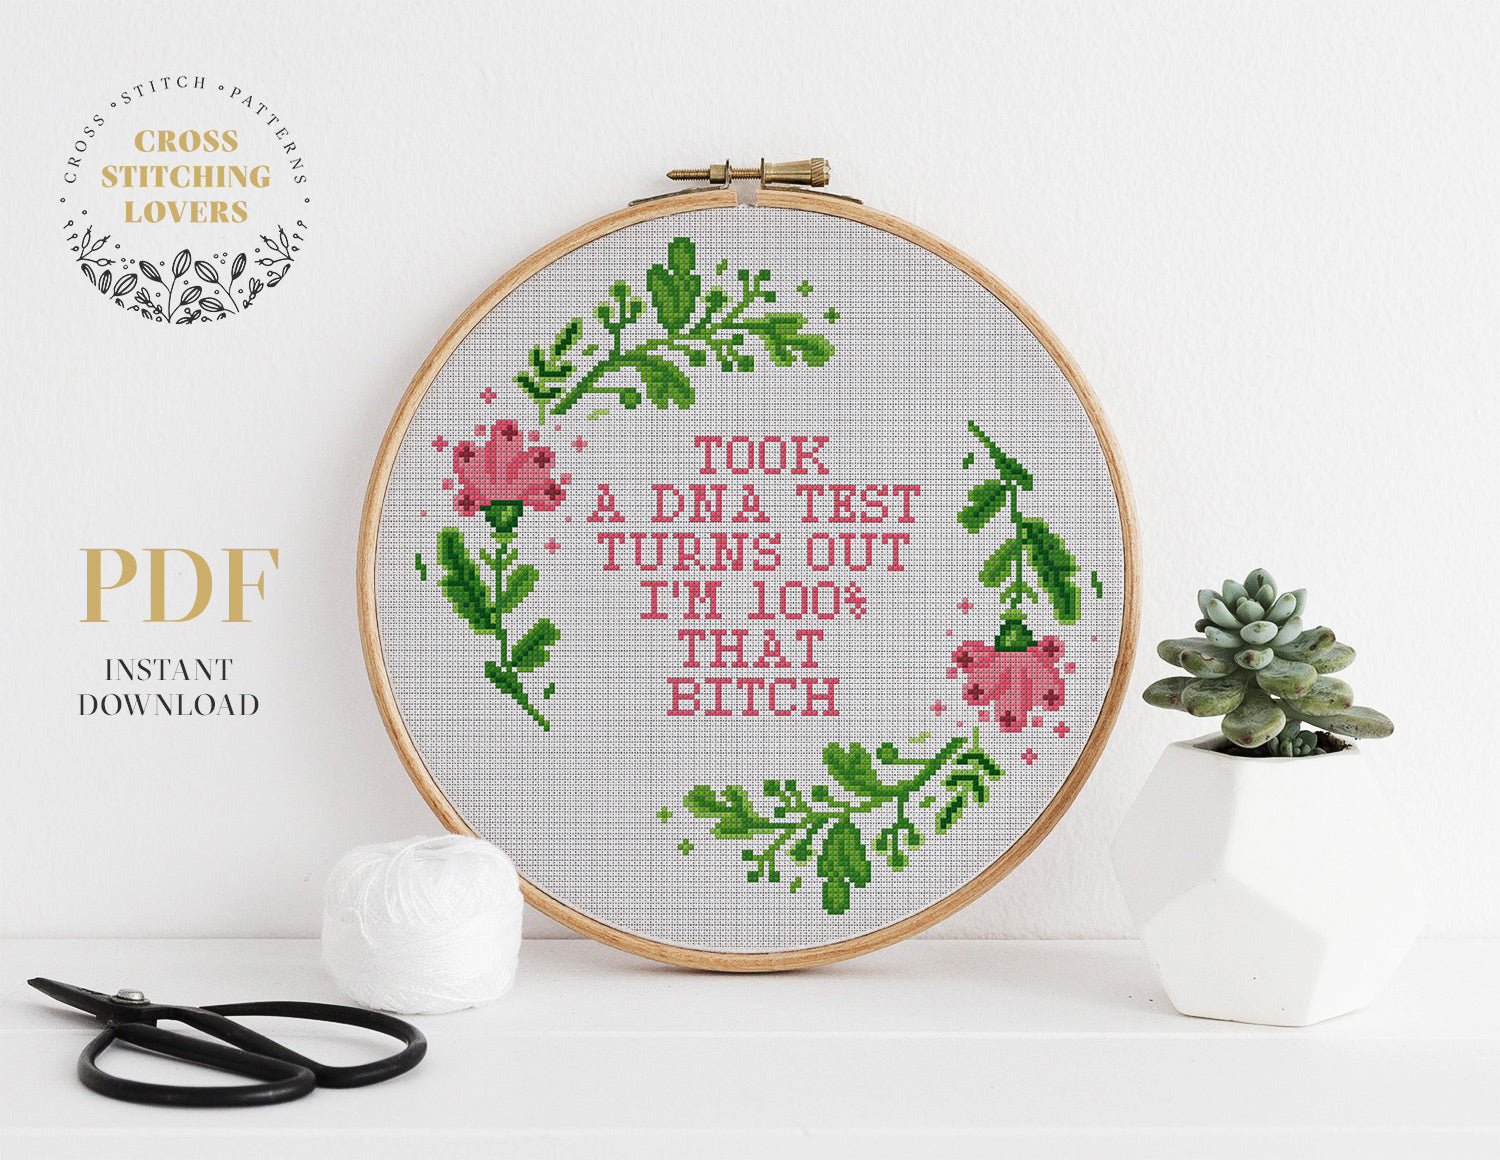 TOOK A DNA TEST TURNS OUT I'M 100% THAT BITCH -  Funny Cross stitch pattern